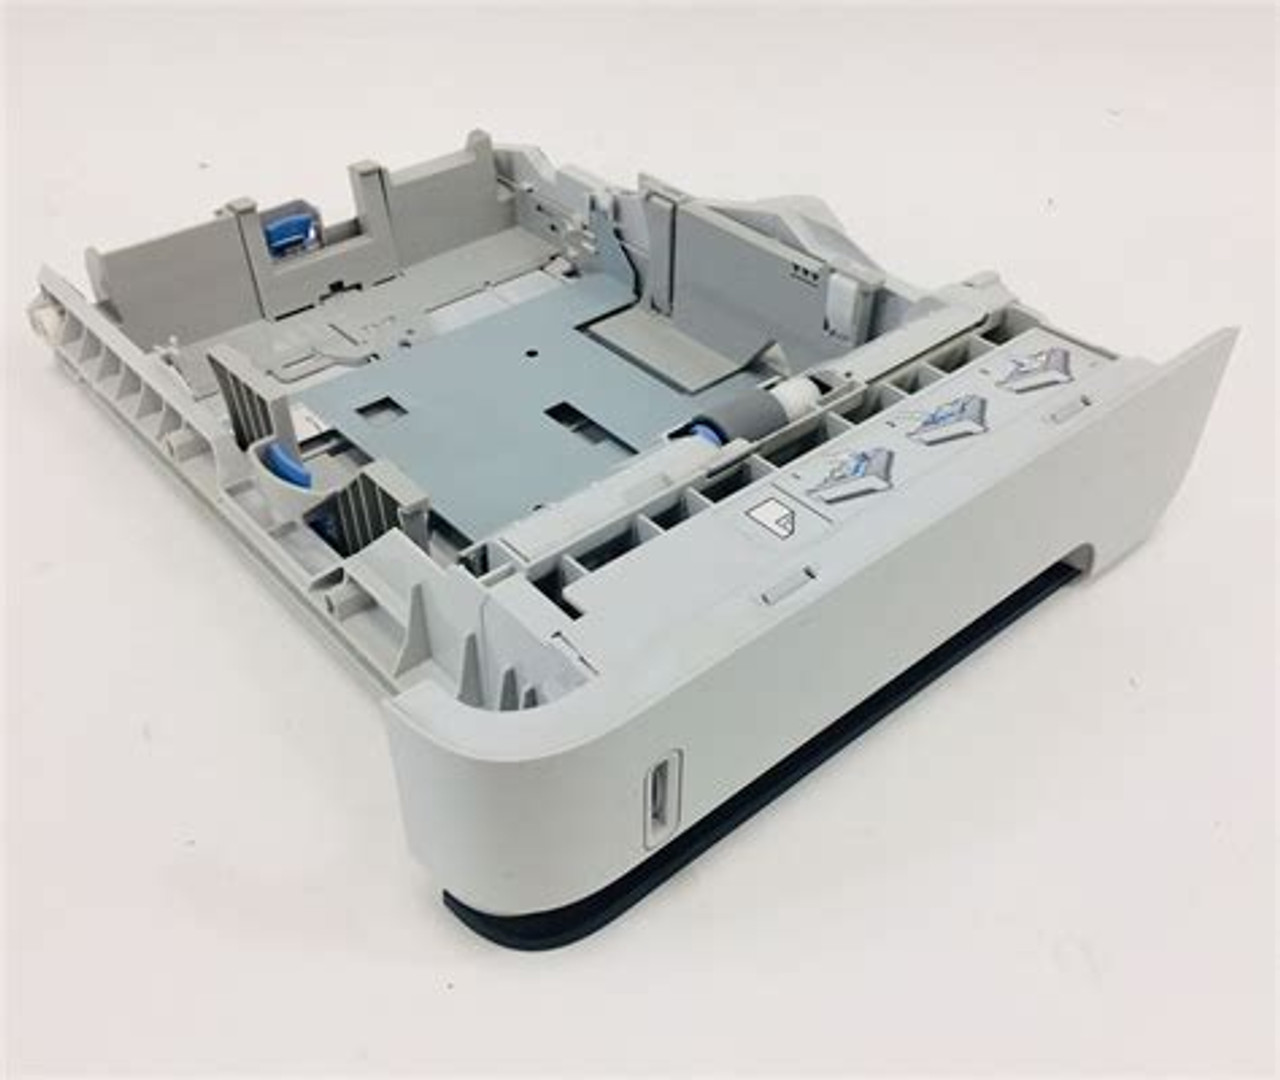 HP Replacement Cassette for a HP P4014 Printer - RM1-4559